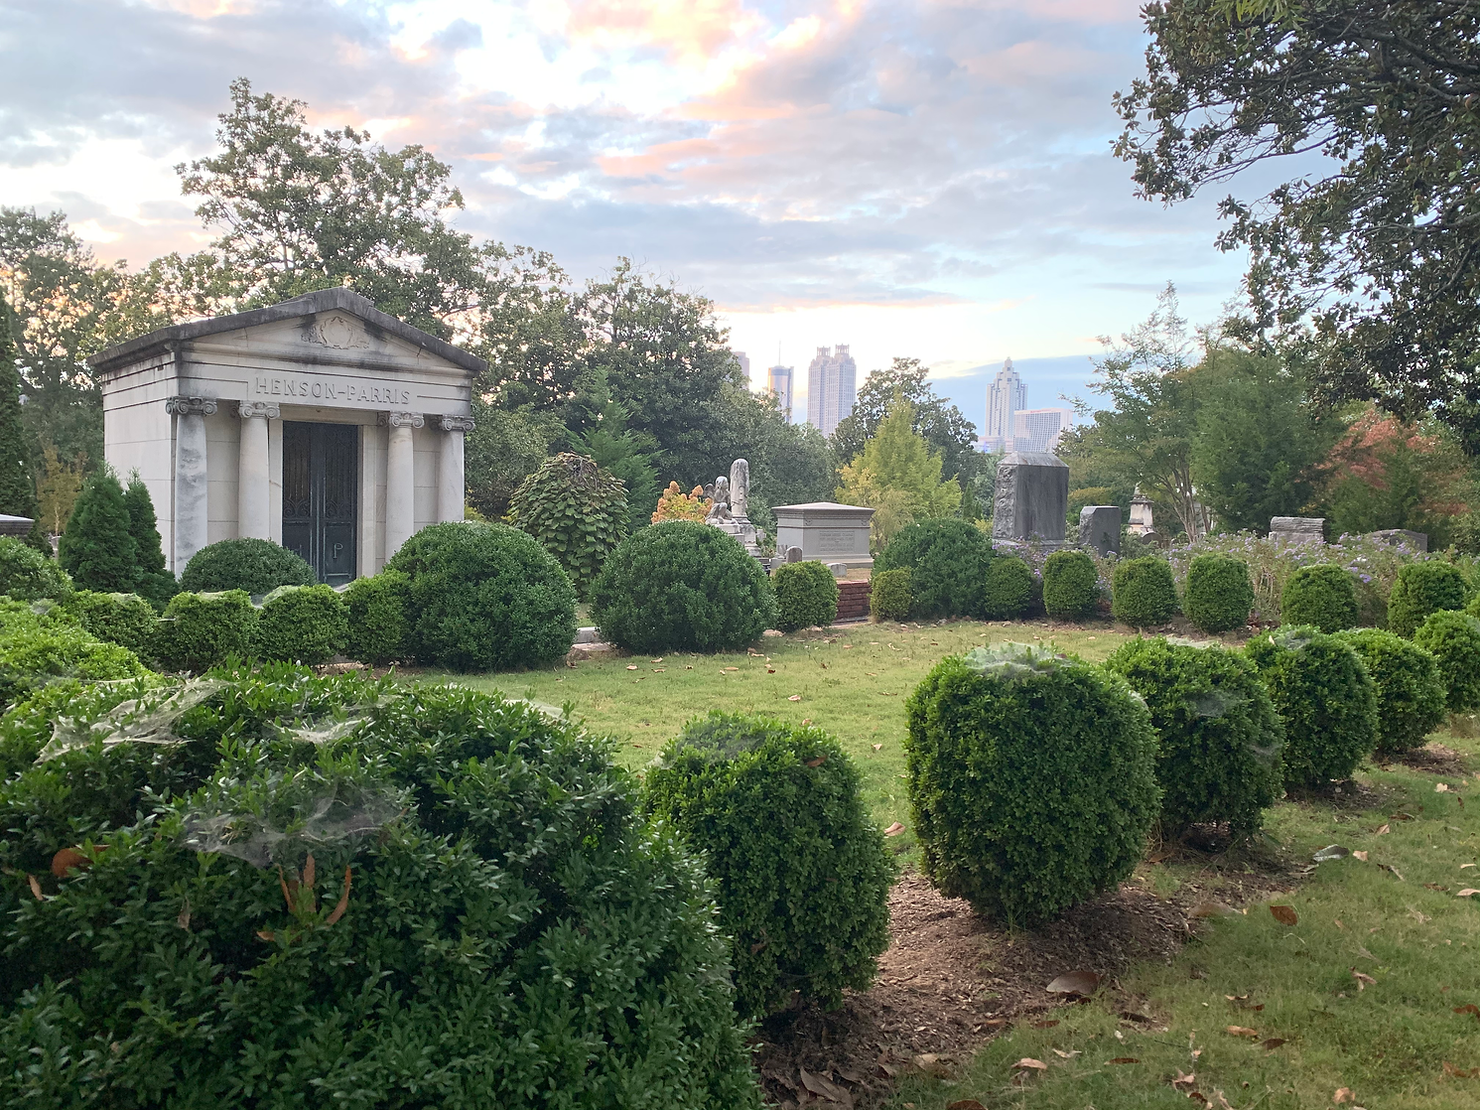 Mausoleum at Oakland Cemetery with Atlanta city skyline in background